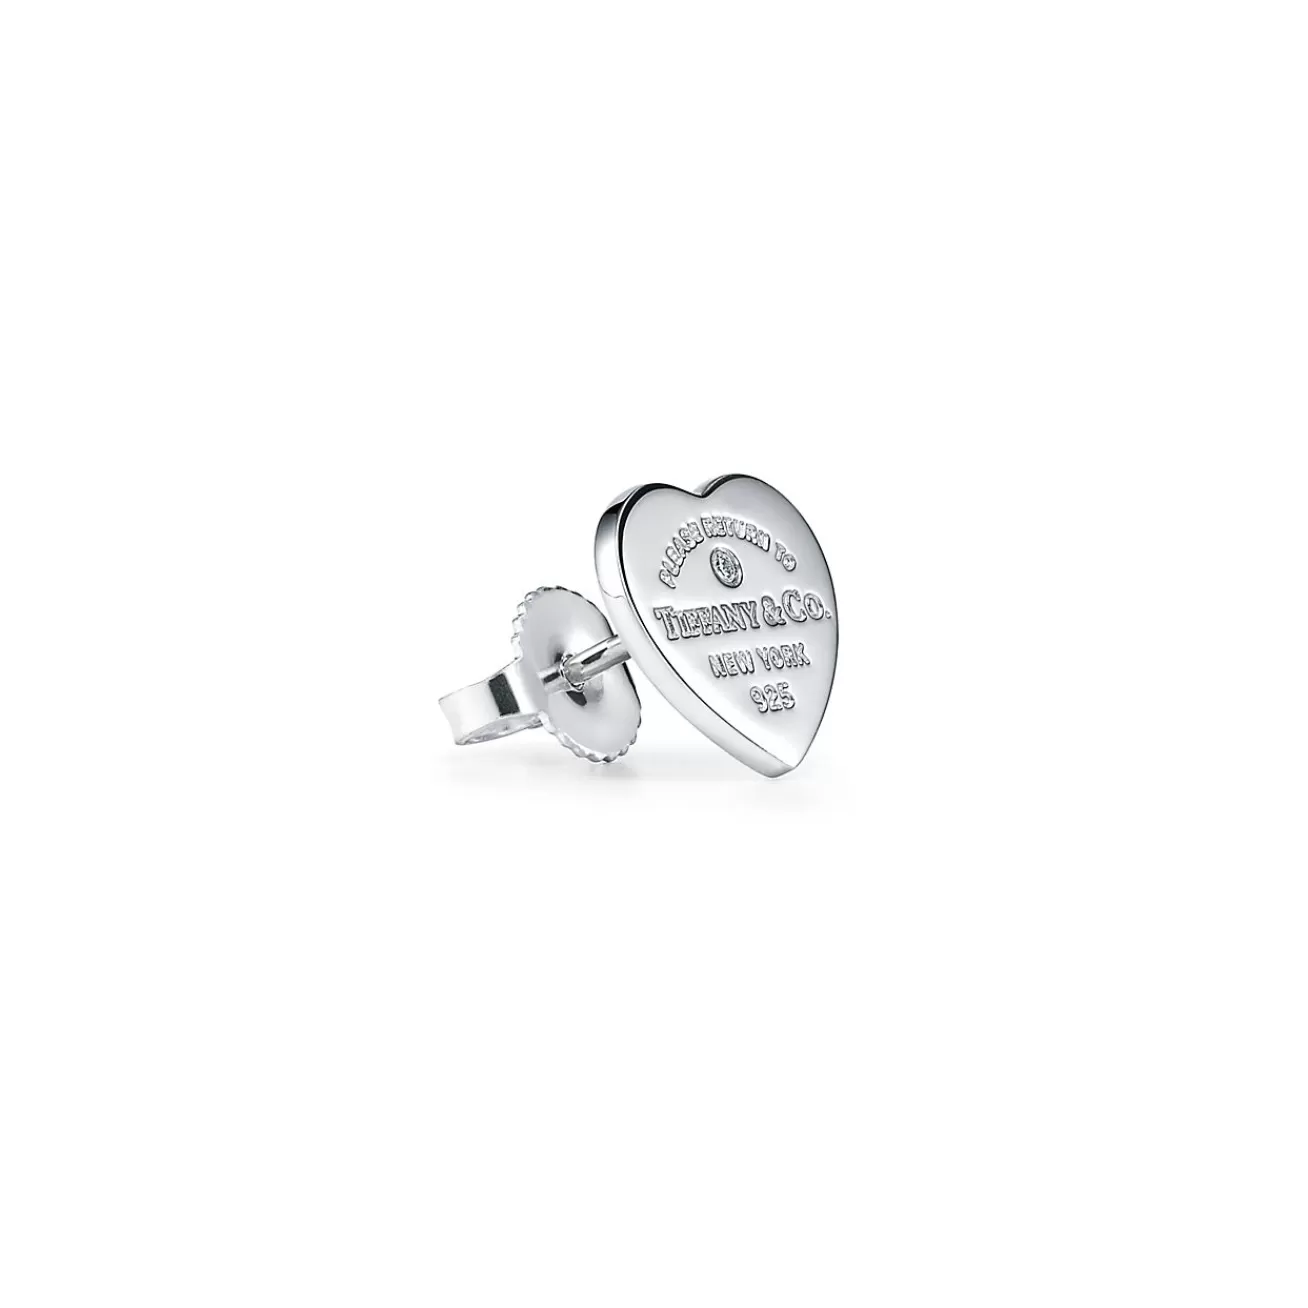 Tiffany & Co. Return to Tiffany® Heart Pendant and Earrings Set in Silver with Diamonds, Mini | ^ Gifts for Her | Her